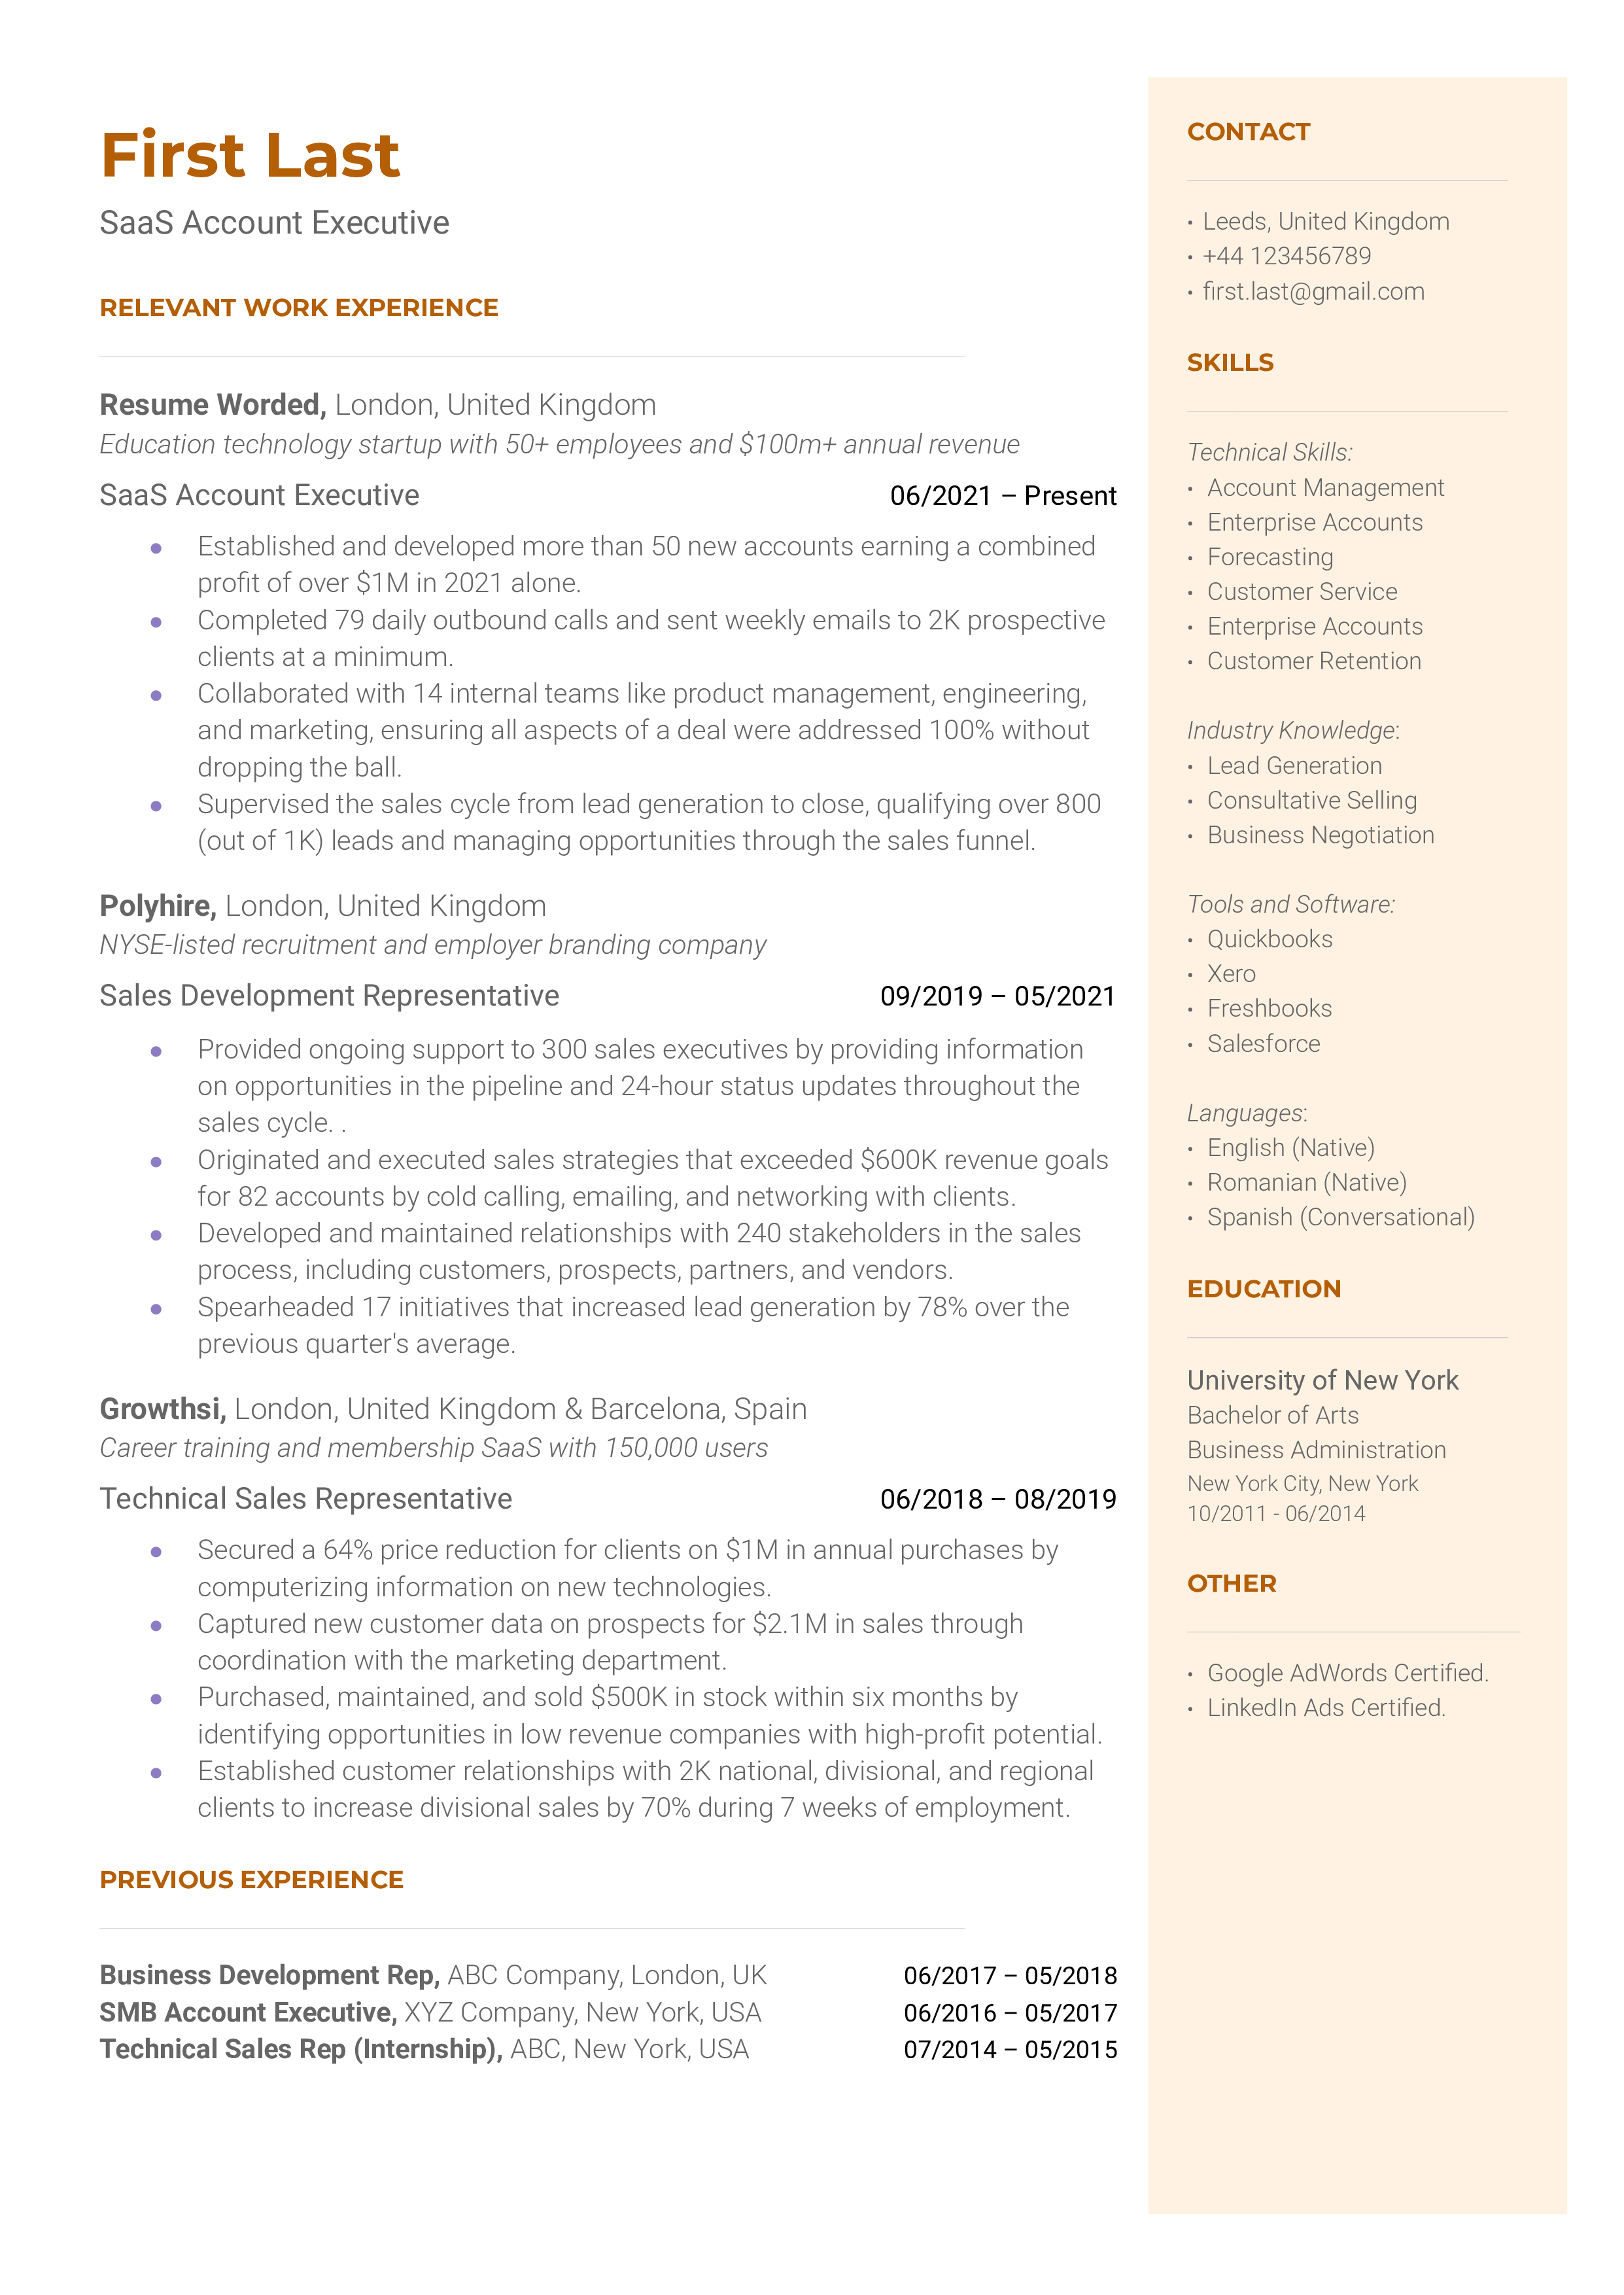 A SaaS Account Executive resume template that includes contact information, skills, and relevant work experience